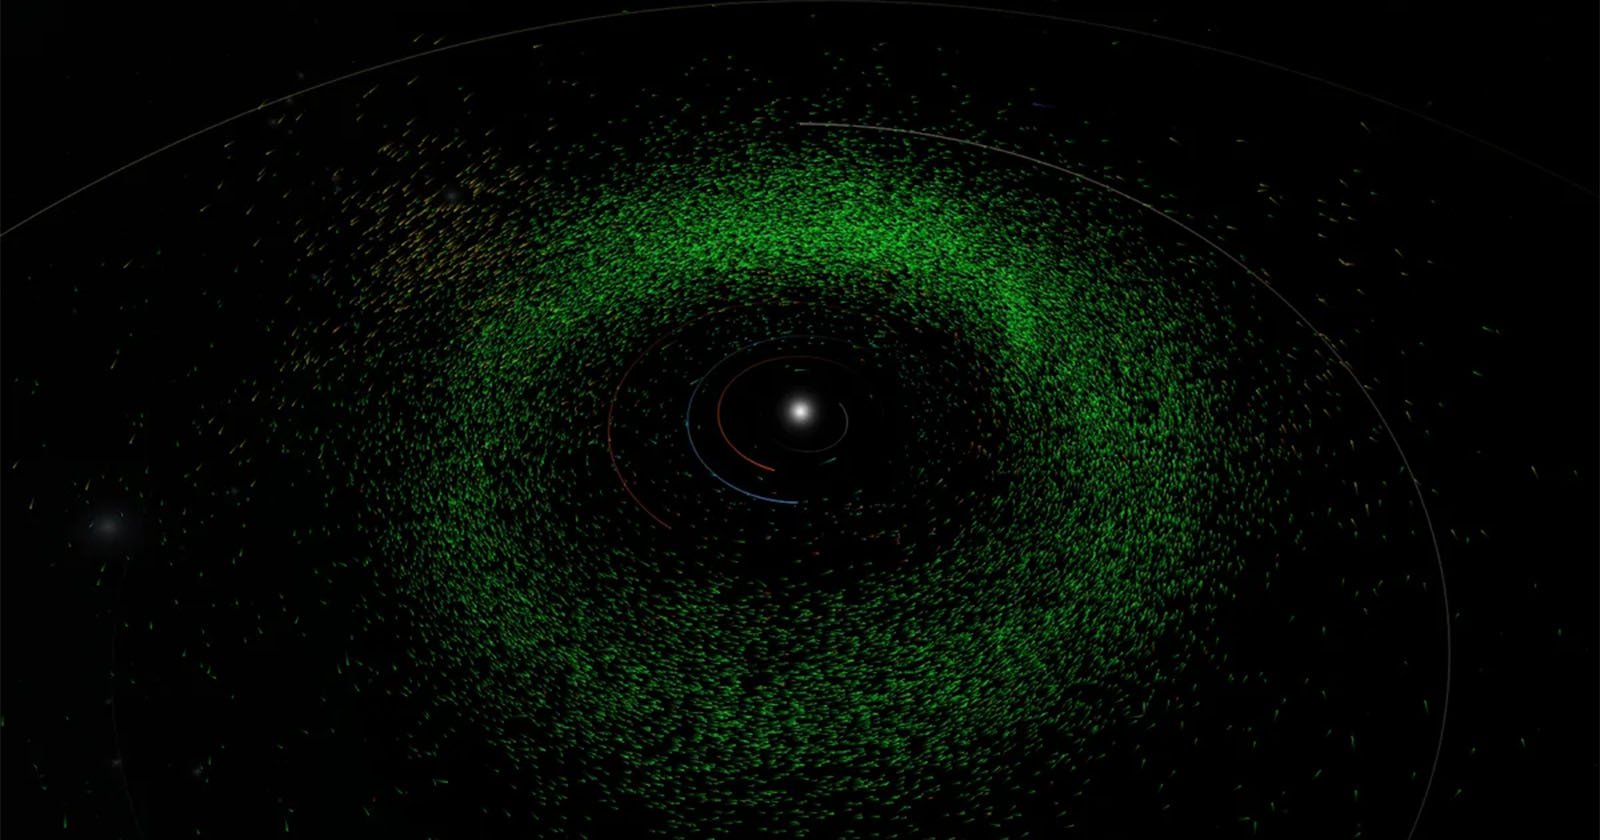 A graphical depiction of space showing numerous green dots representing space debris orbiting around earth, with earth at the center enclosed by concentric circular orbits.